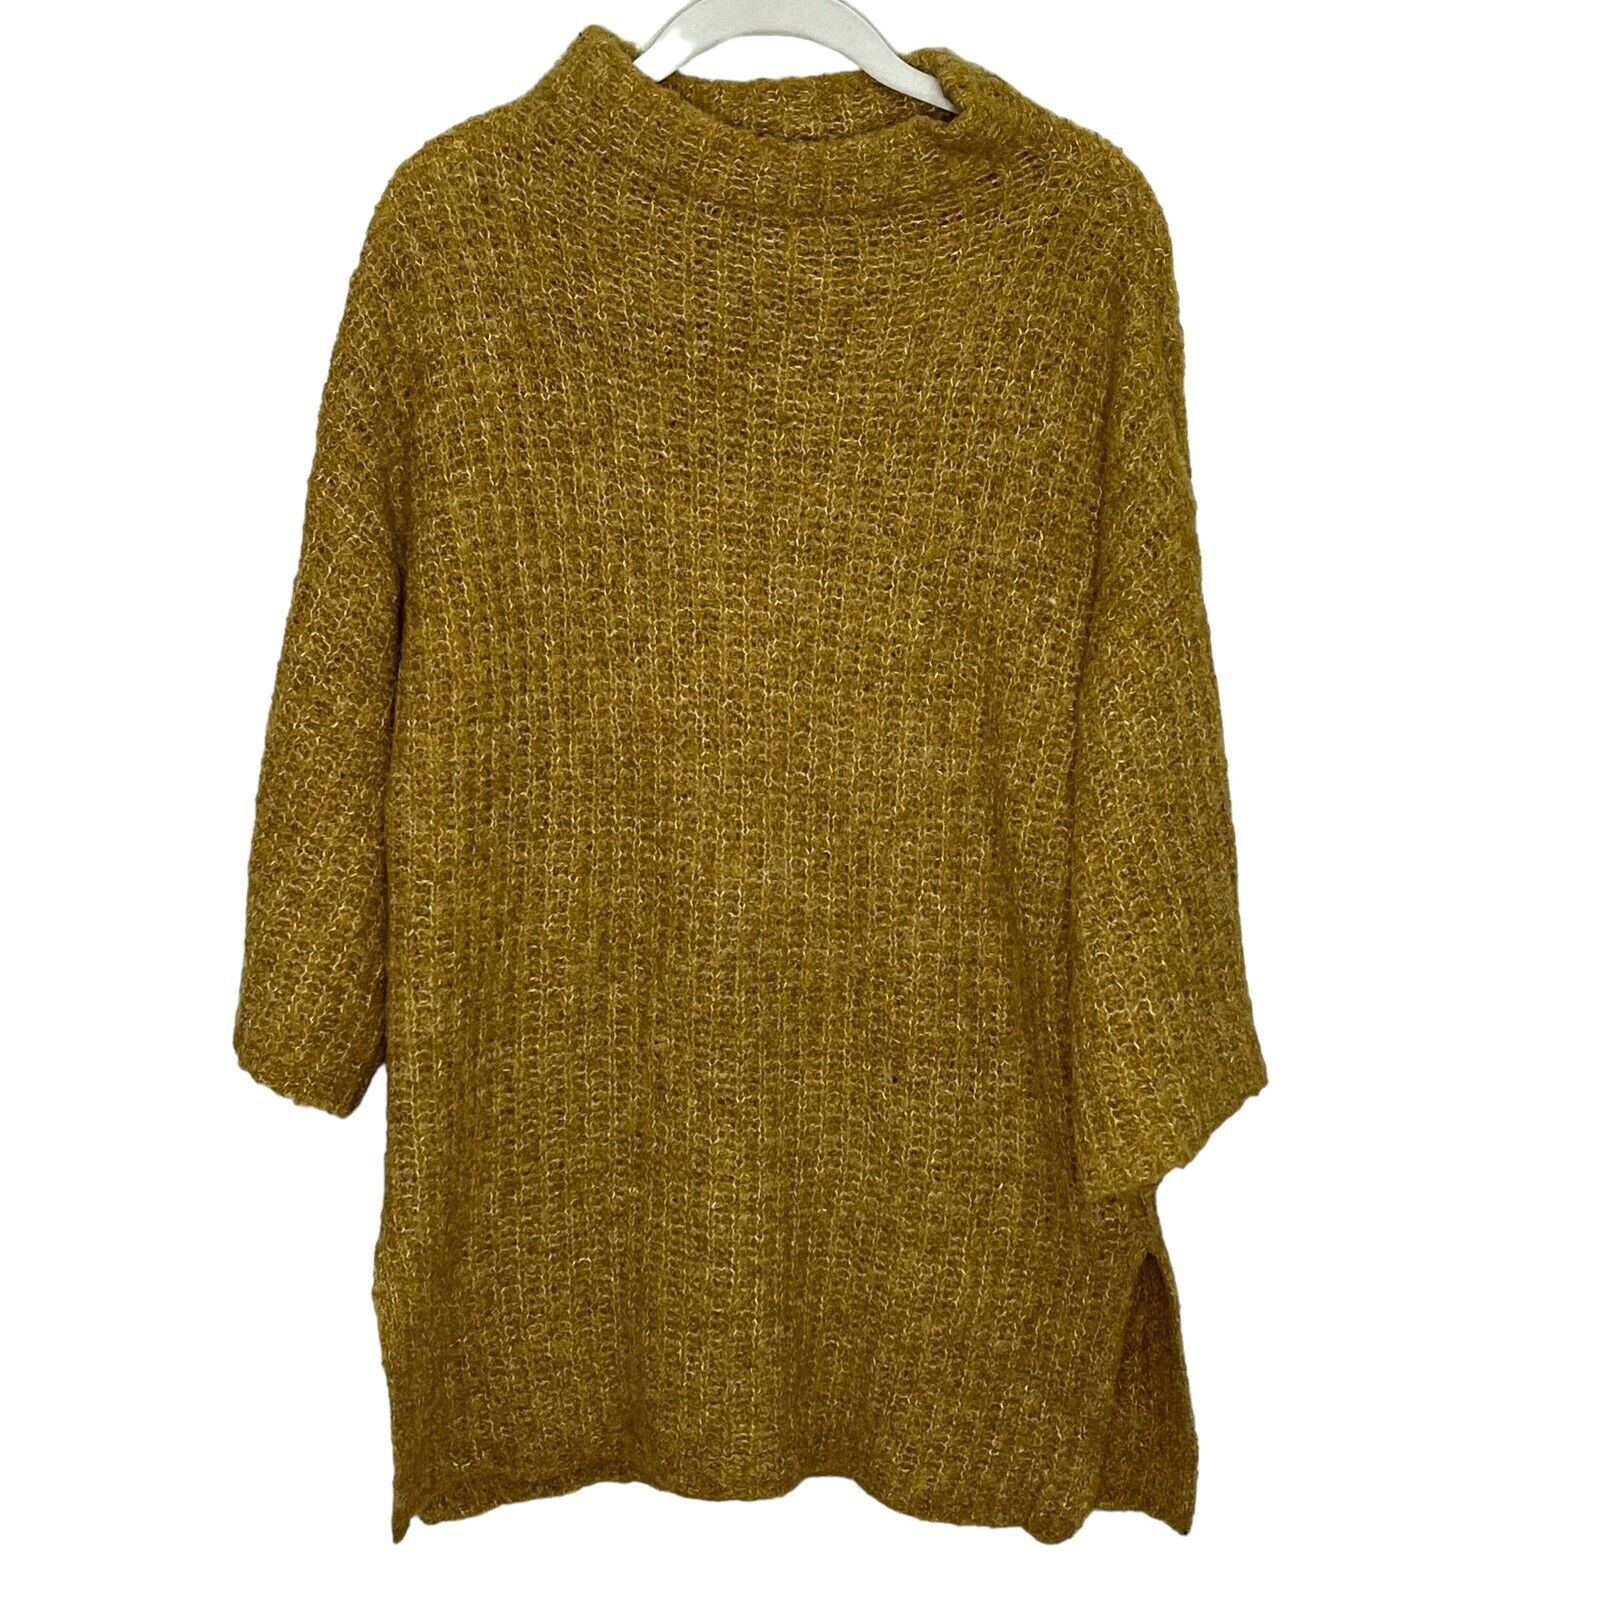 Pieces Mustard Wide Sleeve Sweater Size Small